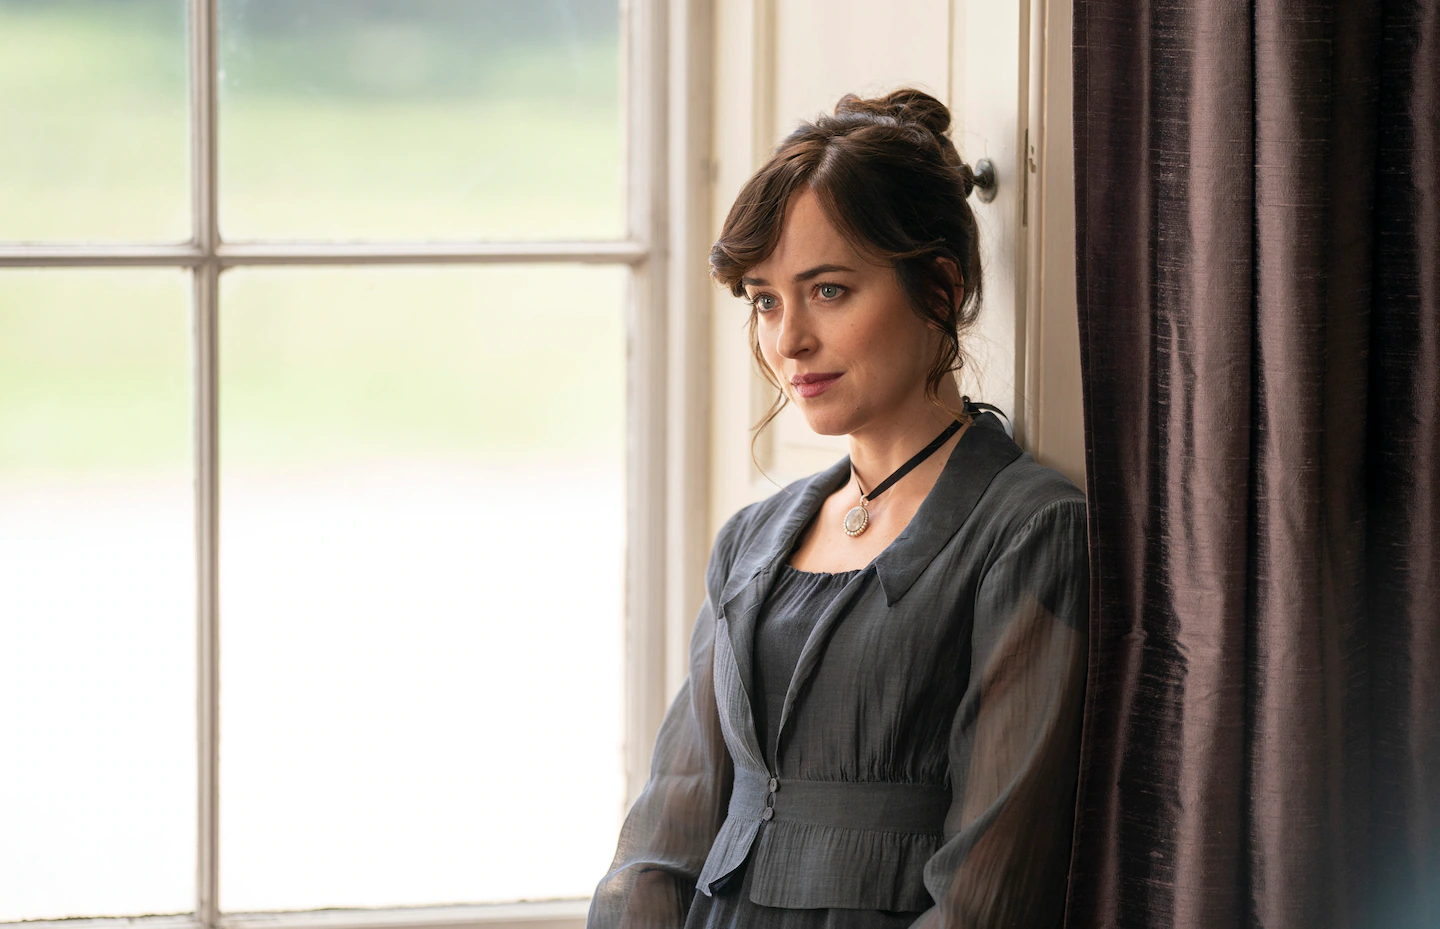 You are currently viewing ‘Persuasion’ is the latest film to misuse Dakota Johnson